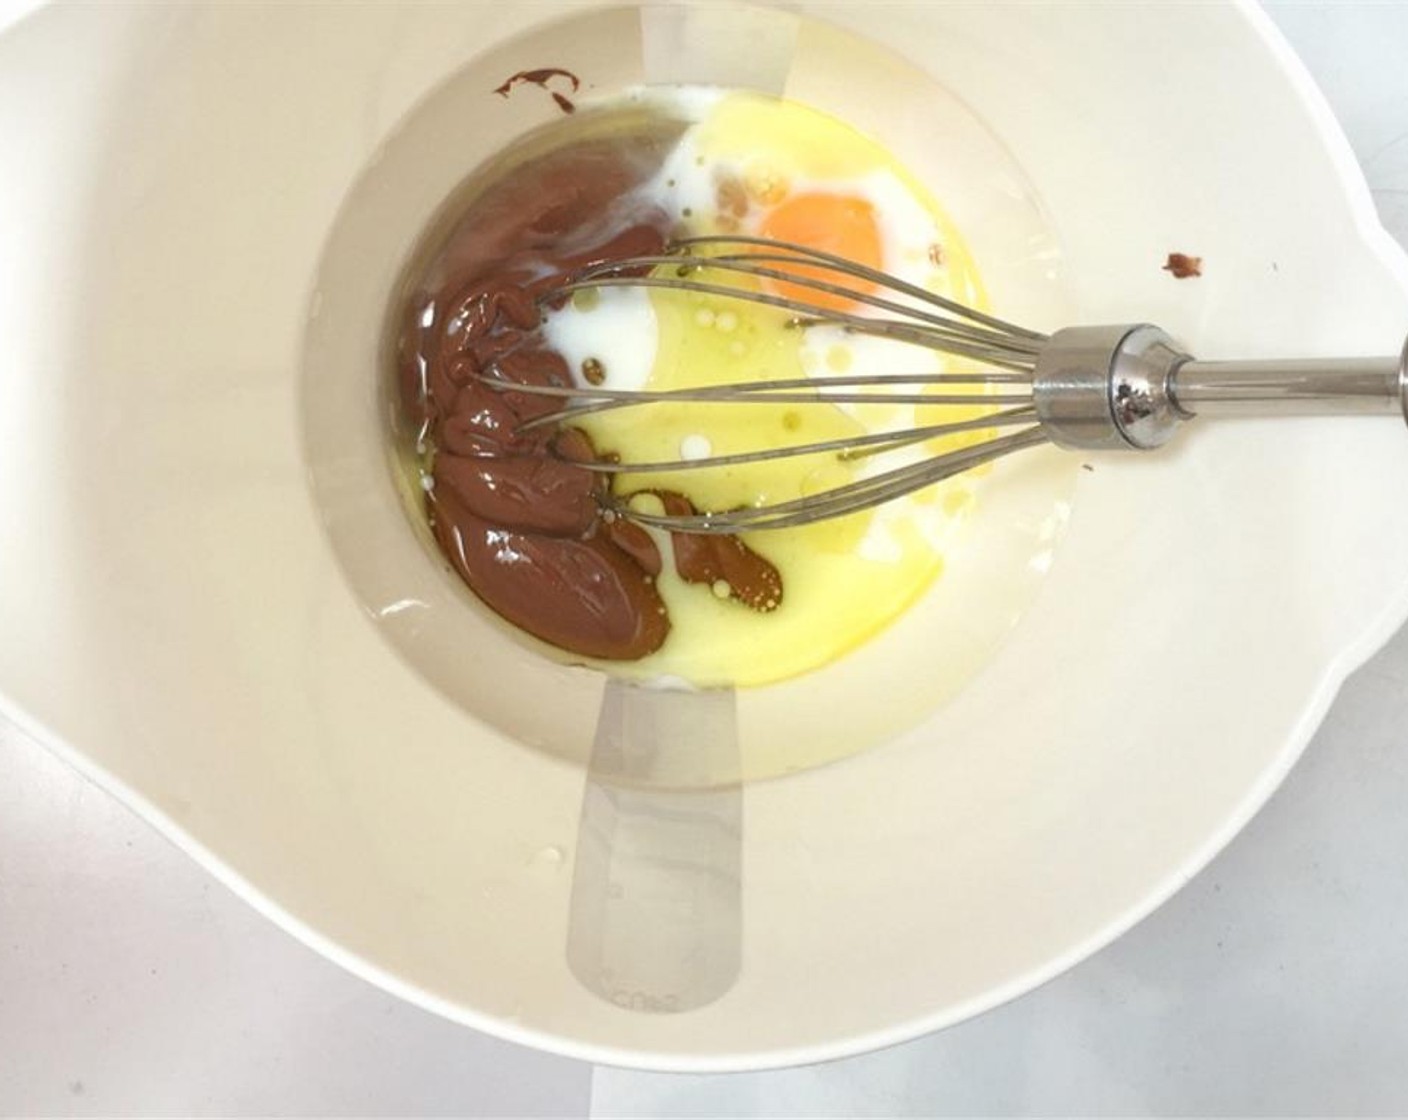 step 1 Add the Milk (3 Tbsp), Egg (1), Vegetable Oil (2 Tbsp) and Nutella® (3 Tbsp) to a high measuring cup.